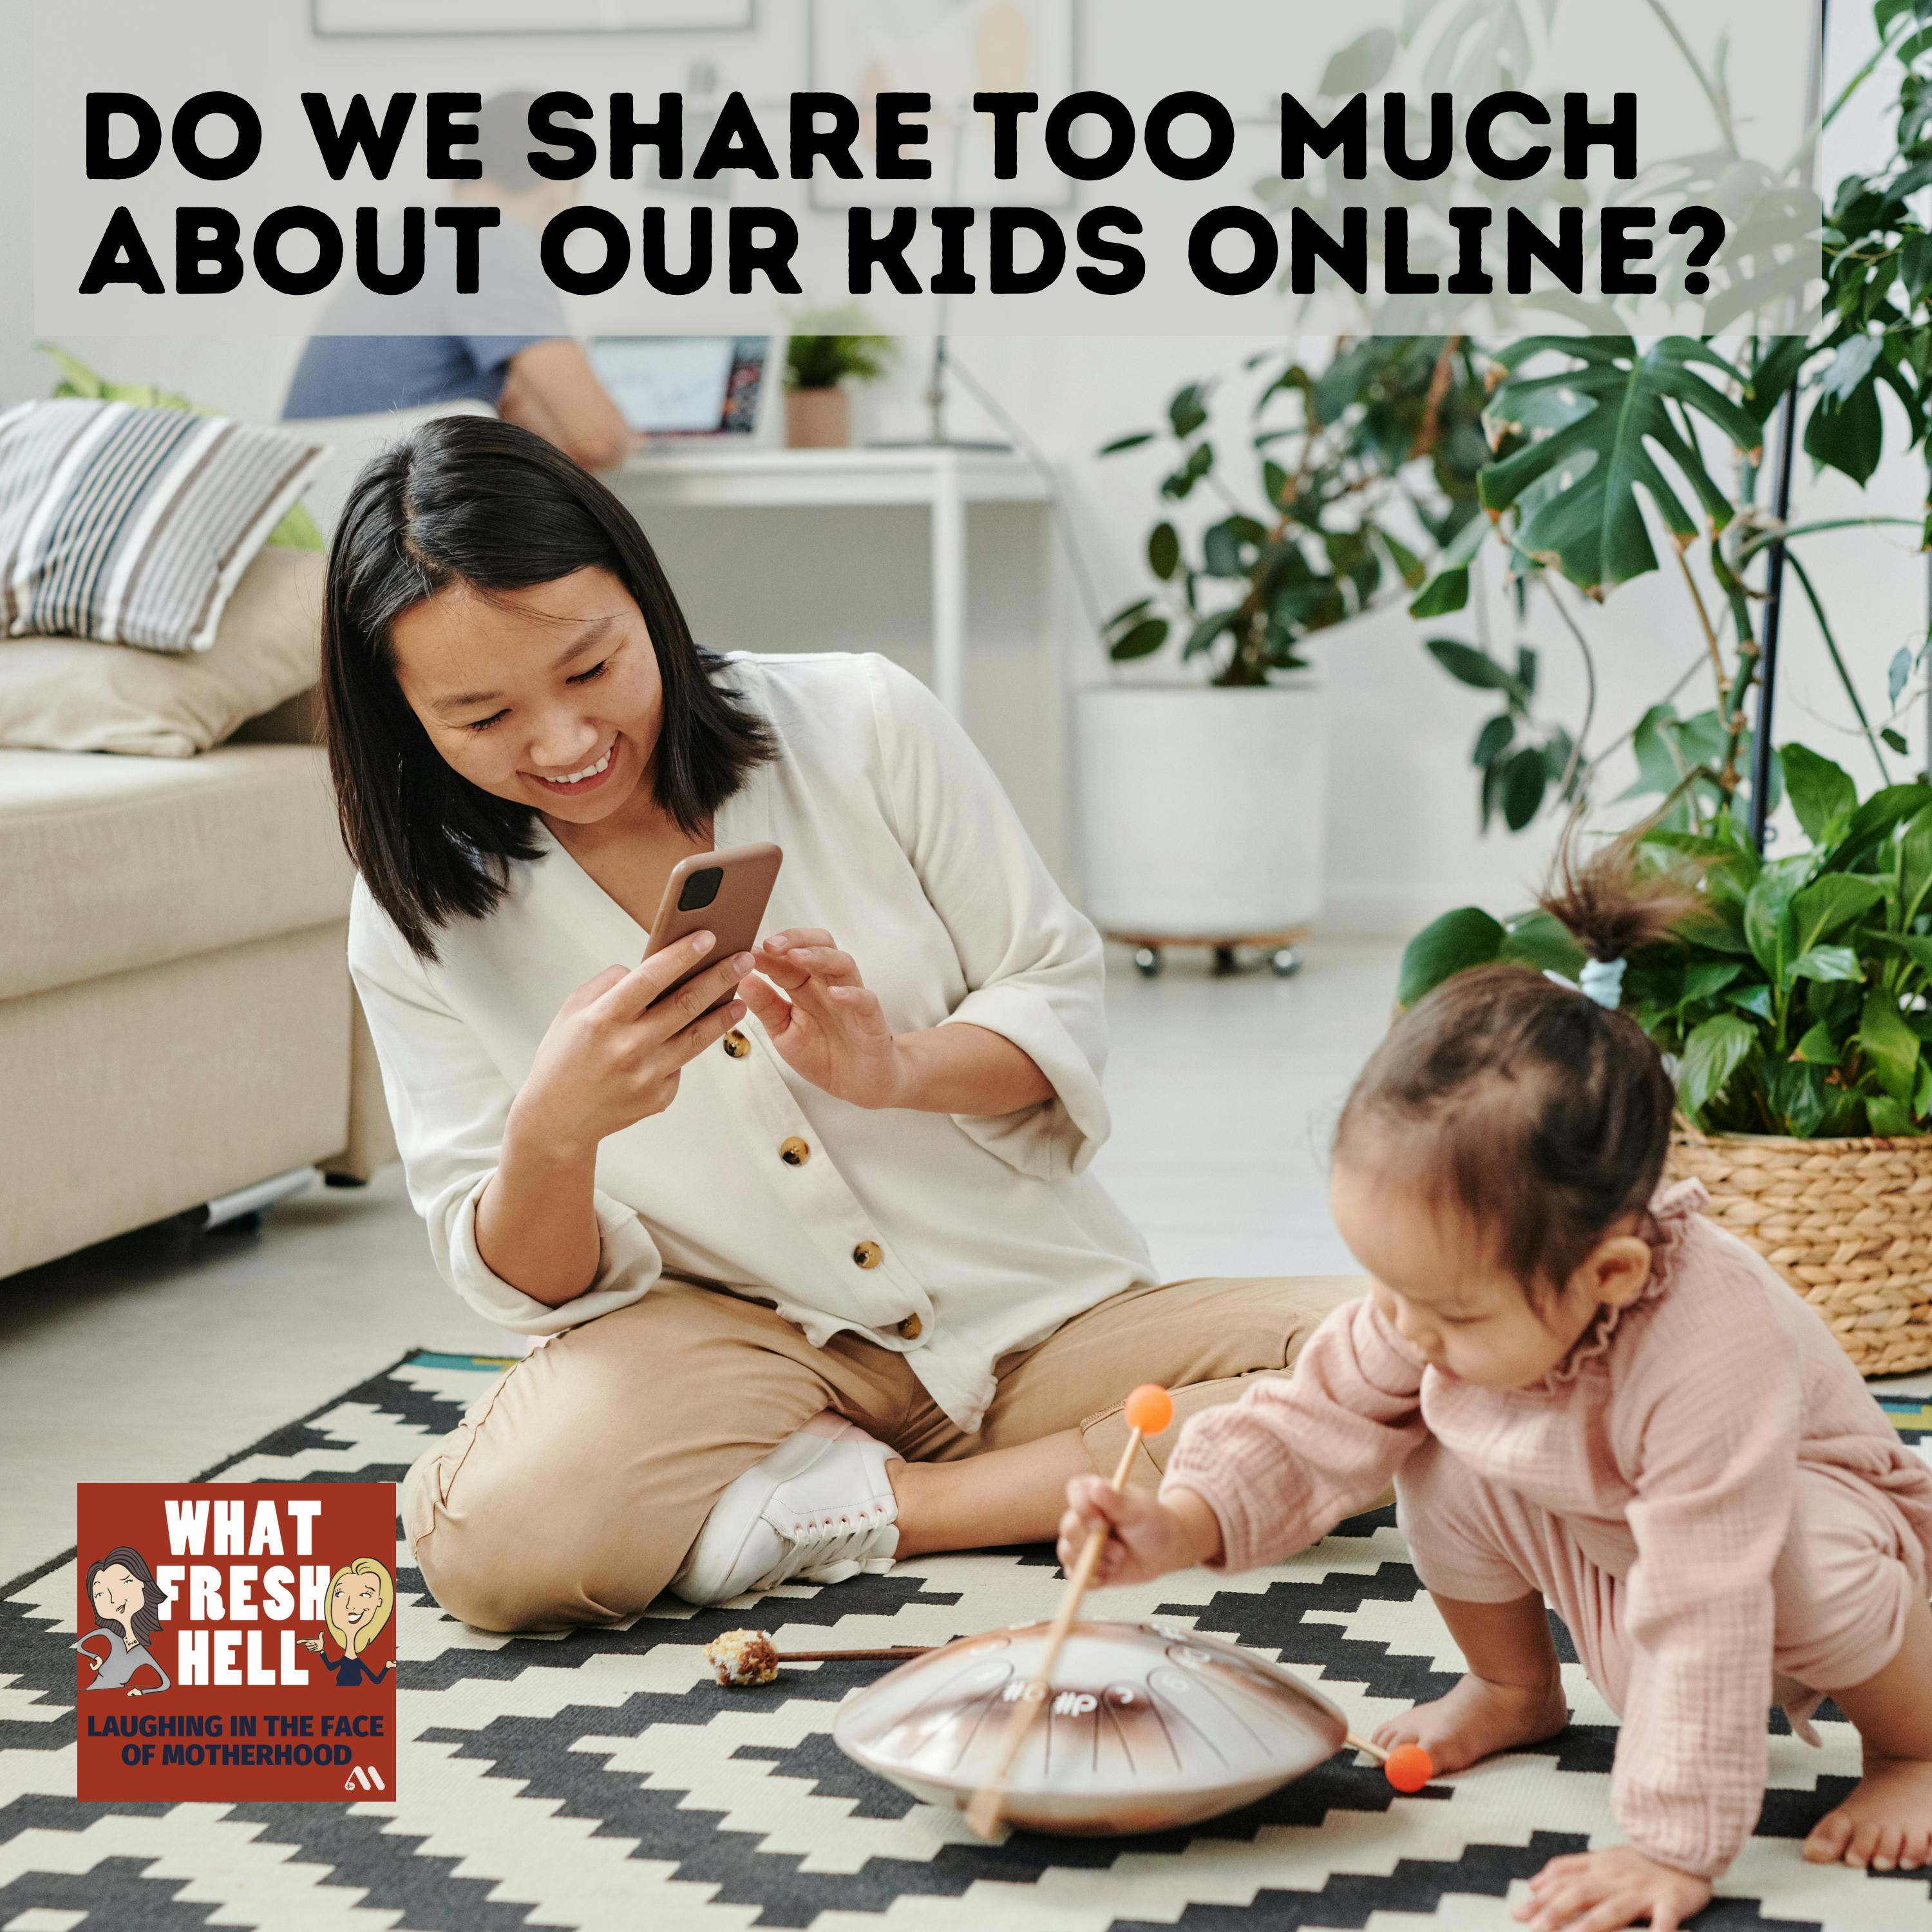 Do We Share Too Much About Our Kids Online?